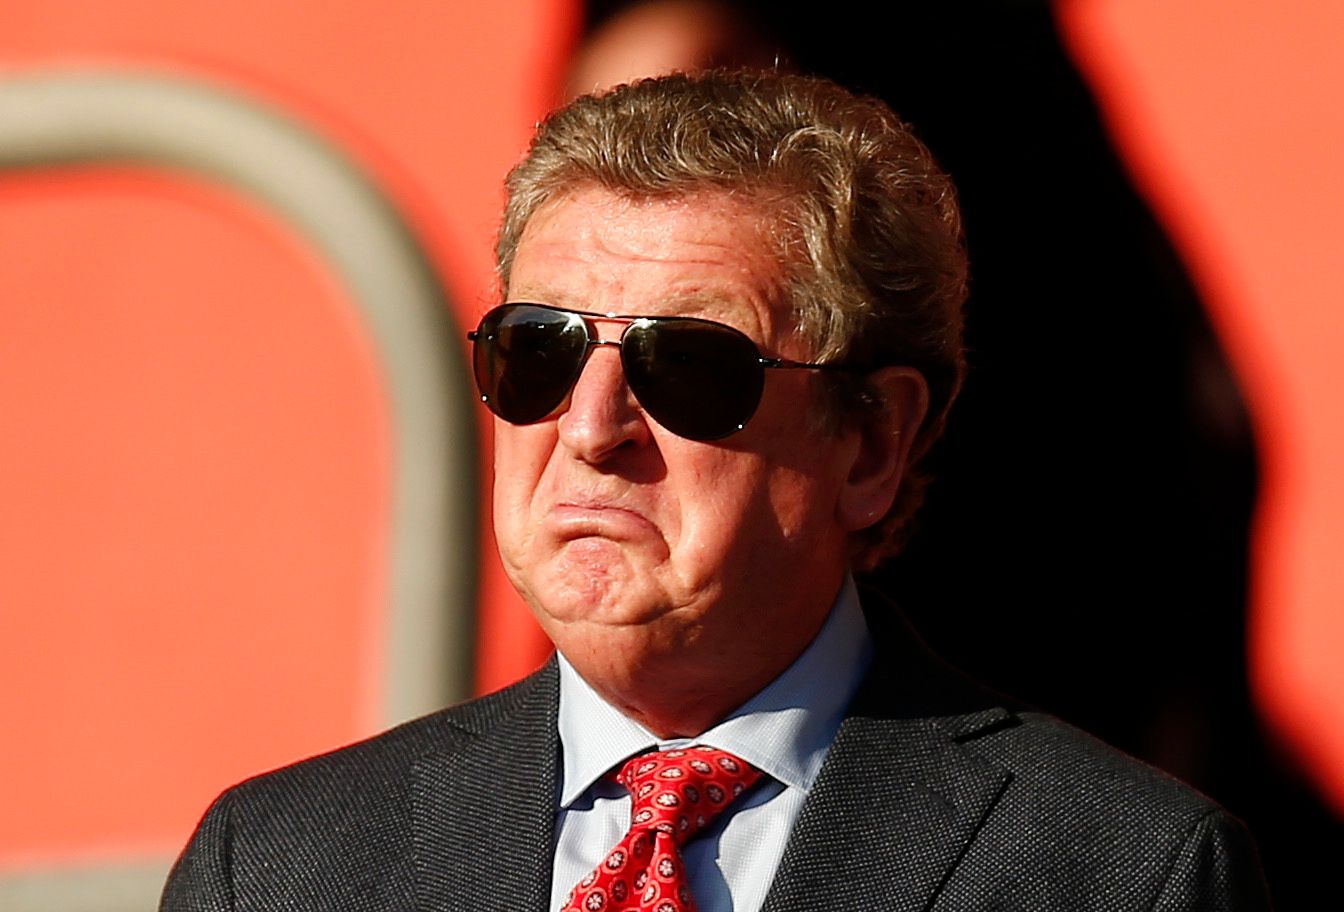 Football - Southampton v Vitesse Arnhem - UEFA Europa League Third Qualifying Round First Leg - St Mary's Stadium, Southampton, England - 30/7/15
England manager Roy Hodgson watches from the stands
Mandatory Credit: Action Images / Andrew Couldridge
Livepic
EDITORIAL USE ONLY.